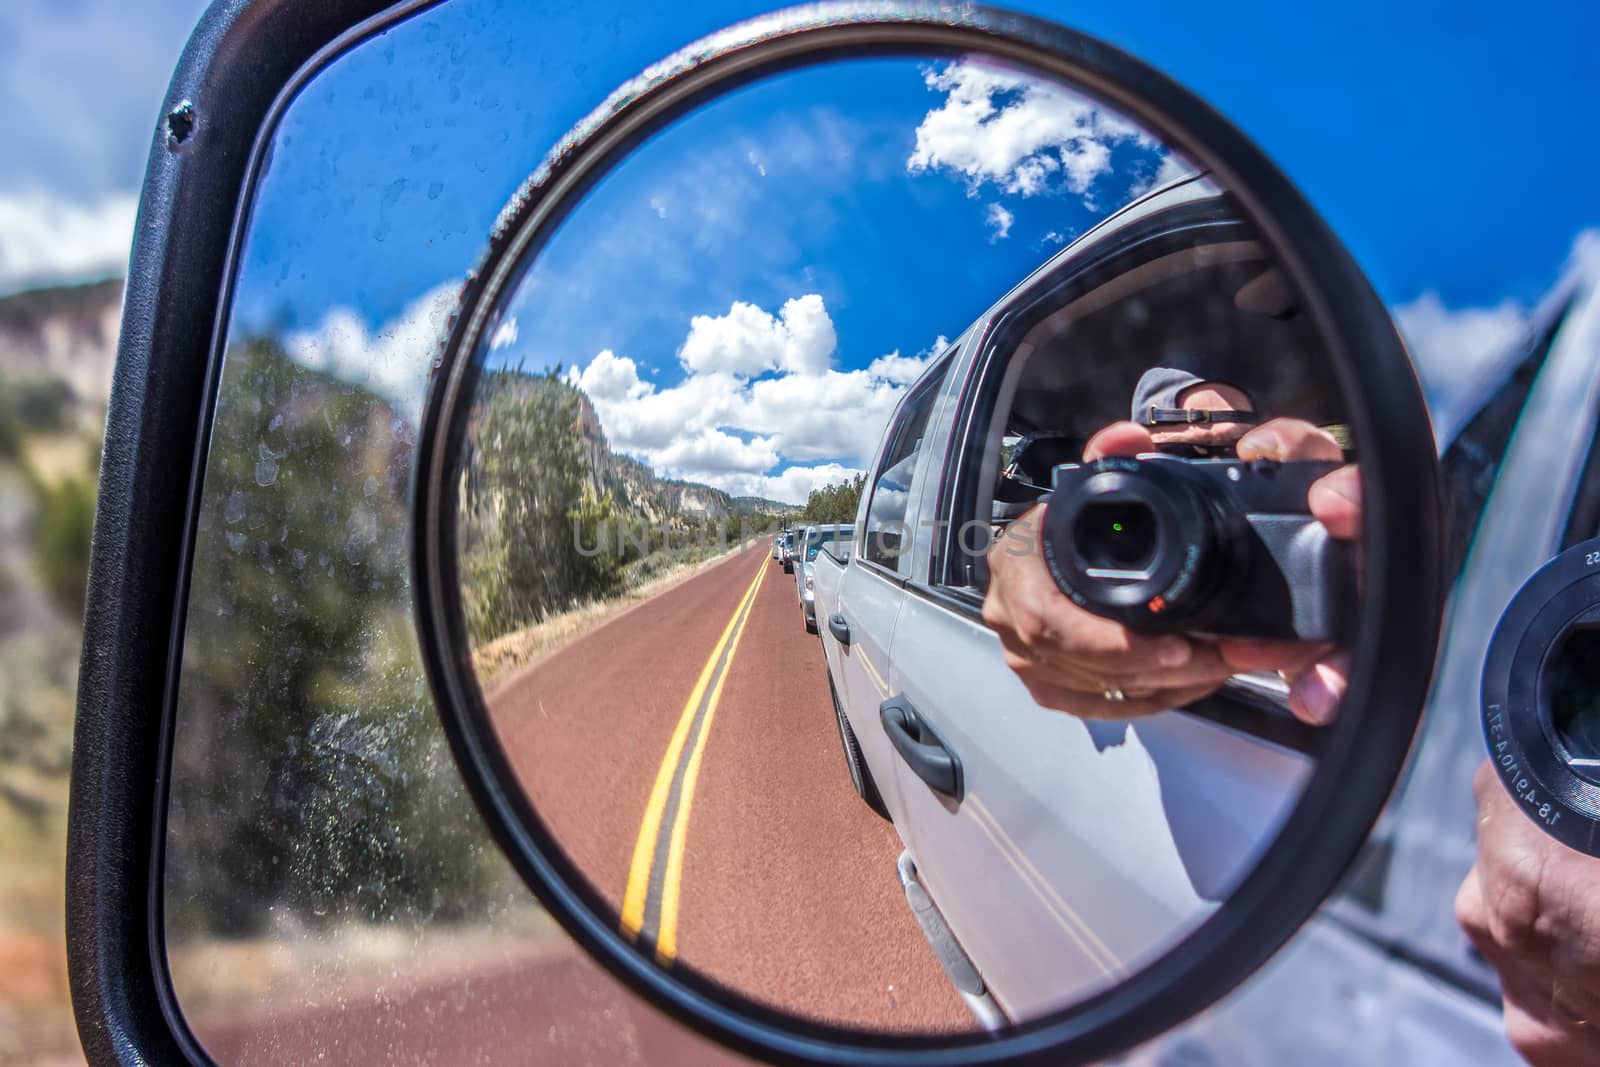  camera reflected in the rearview mirror of a car on a summer day